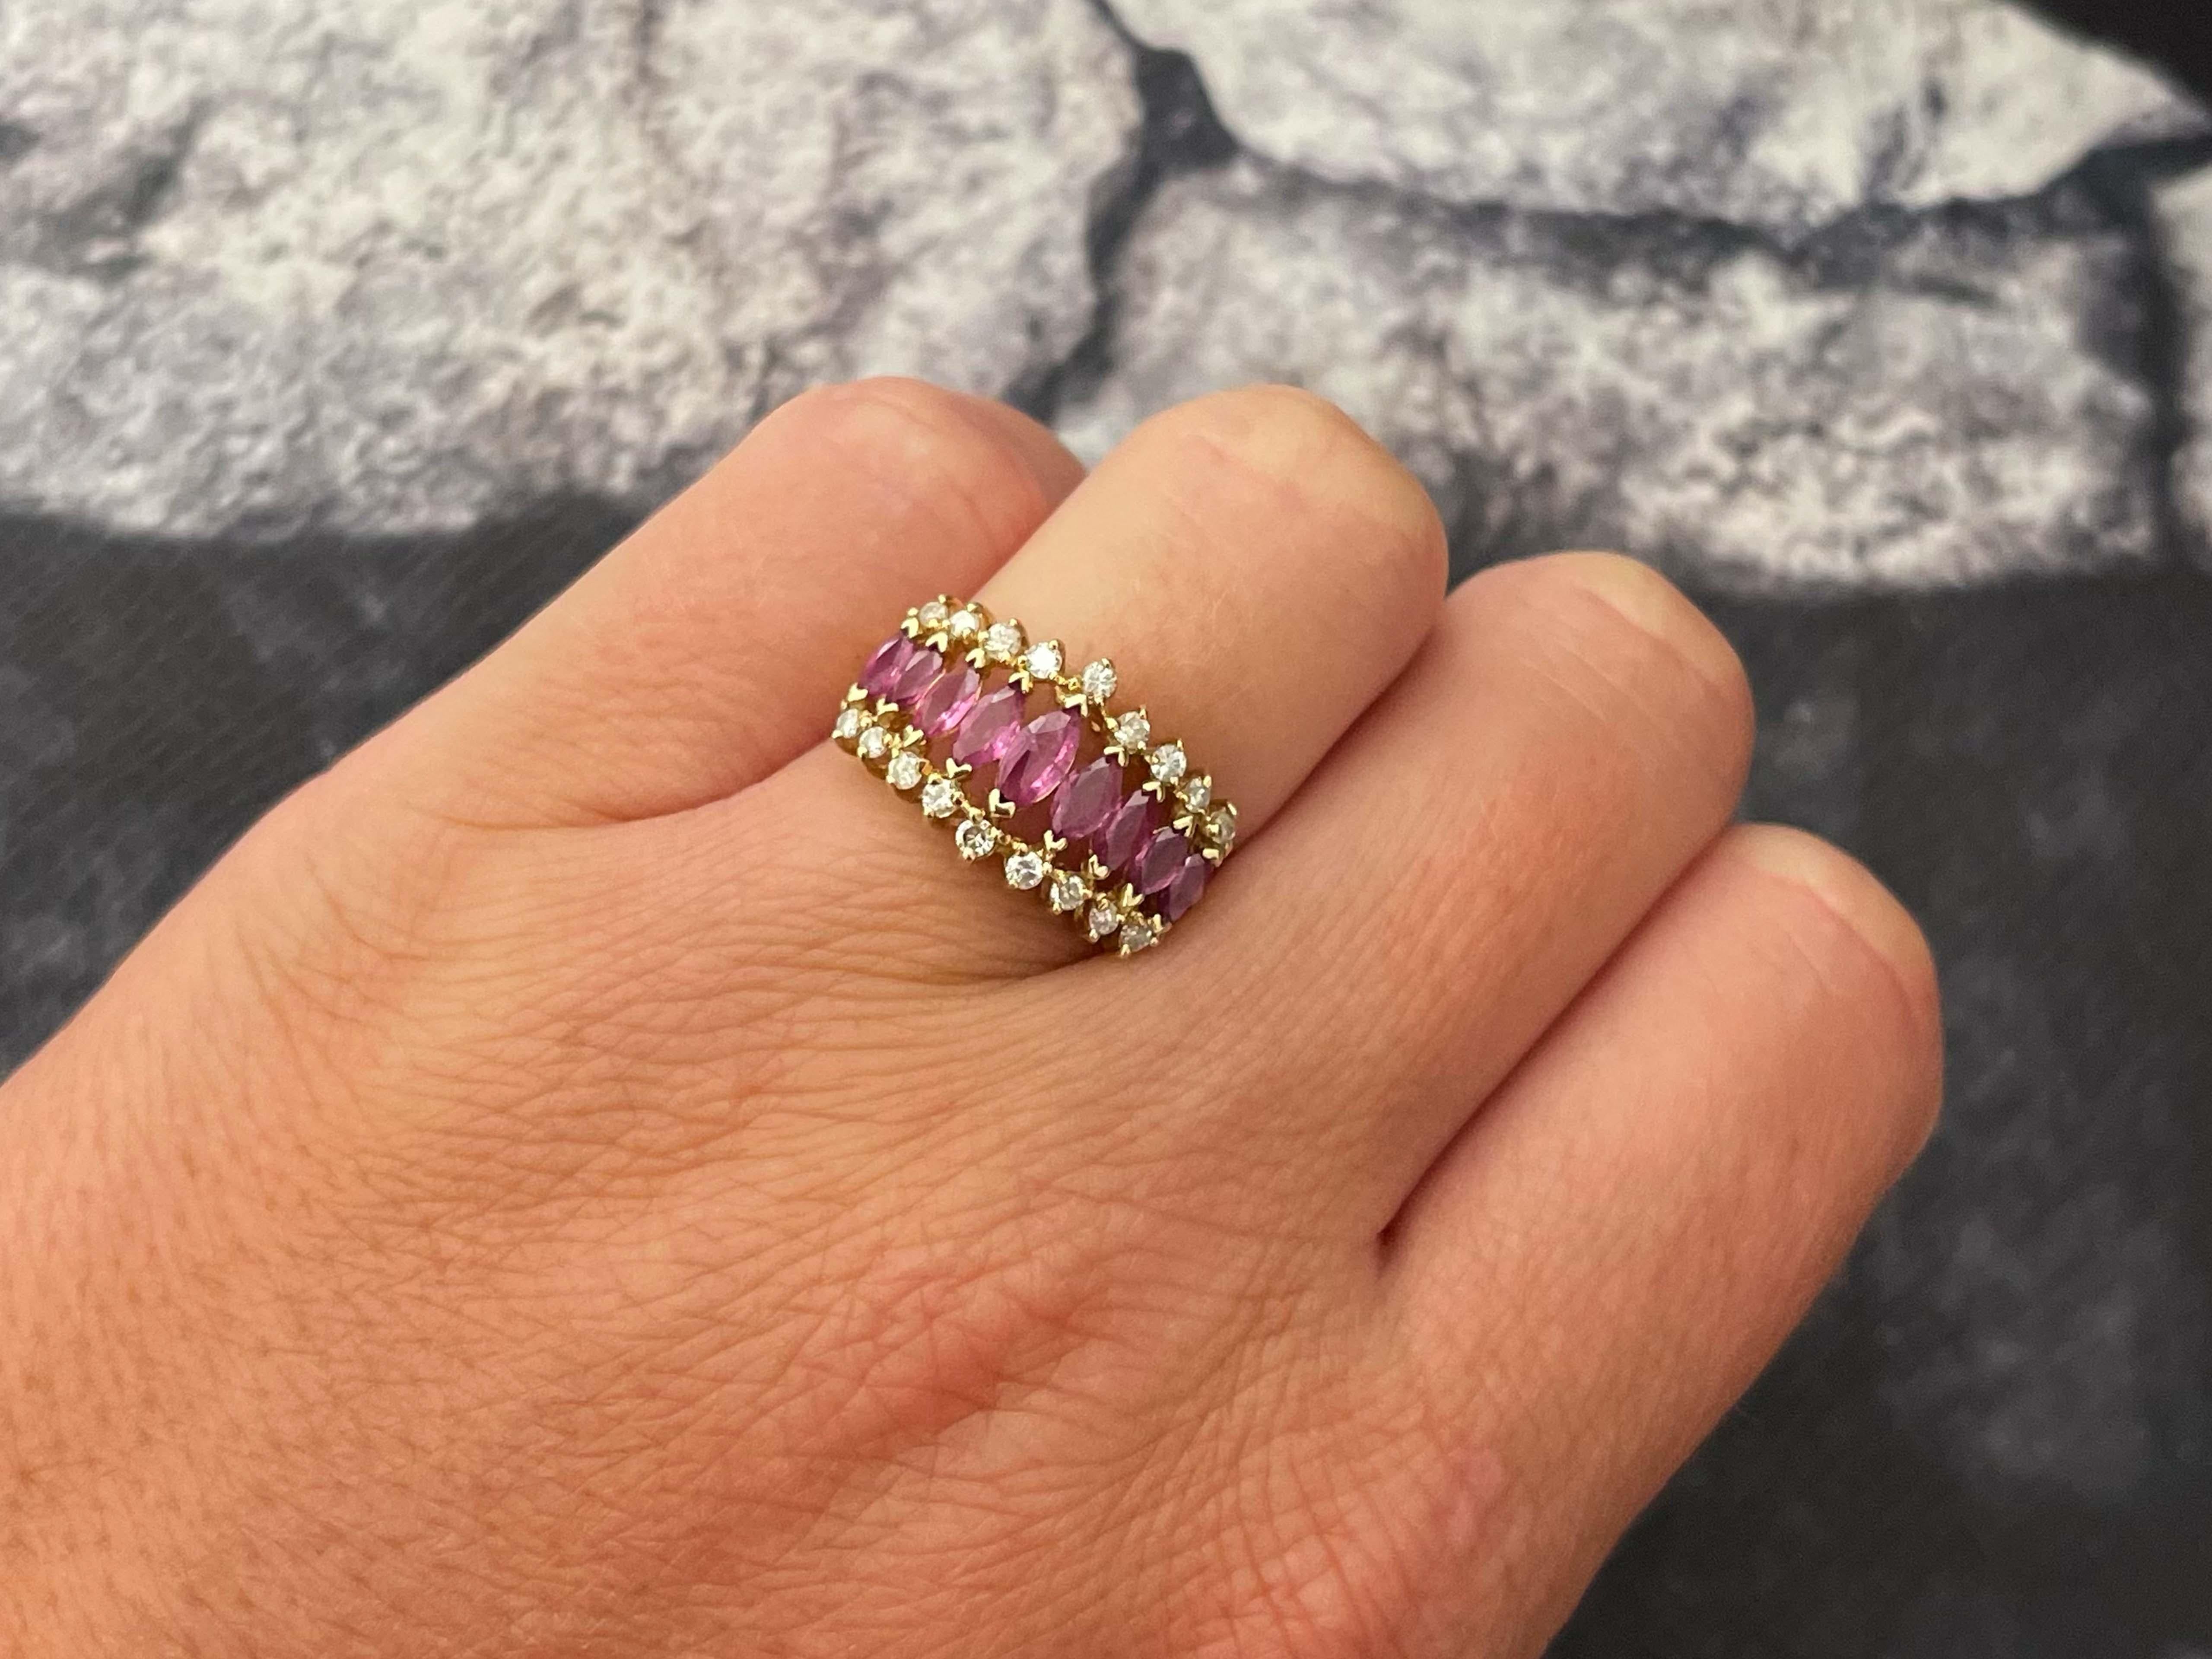 Item Specifications:

Metal: 14K Yellow Gold

Style: Statement Ring

Ring Size: 5.5 (resizing available for a fee)

Total Weight: 4.1 Grams

Gemstone Specifications:

Gemstones: 9 red rubies

Ruby Carat Weight: 1 carat

Diamond Carat Weight: 0.25